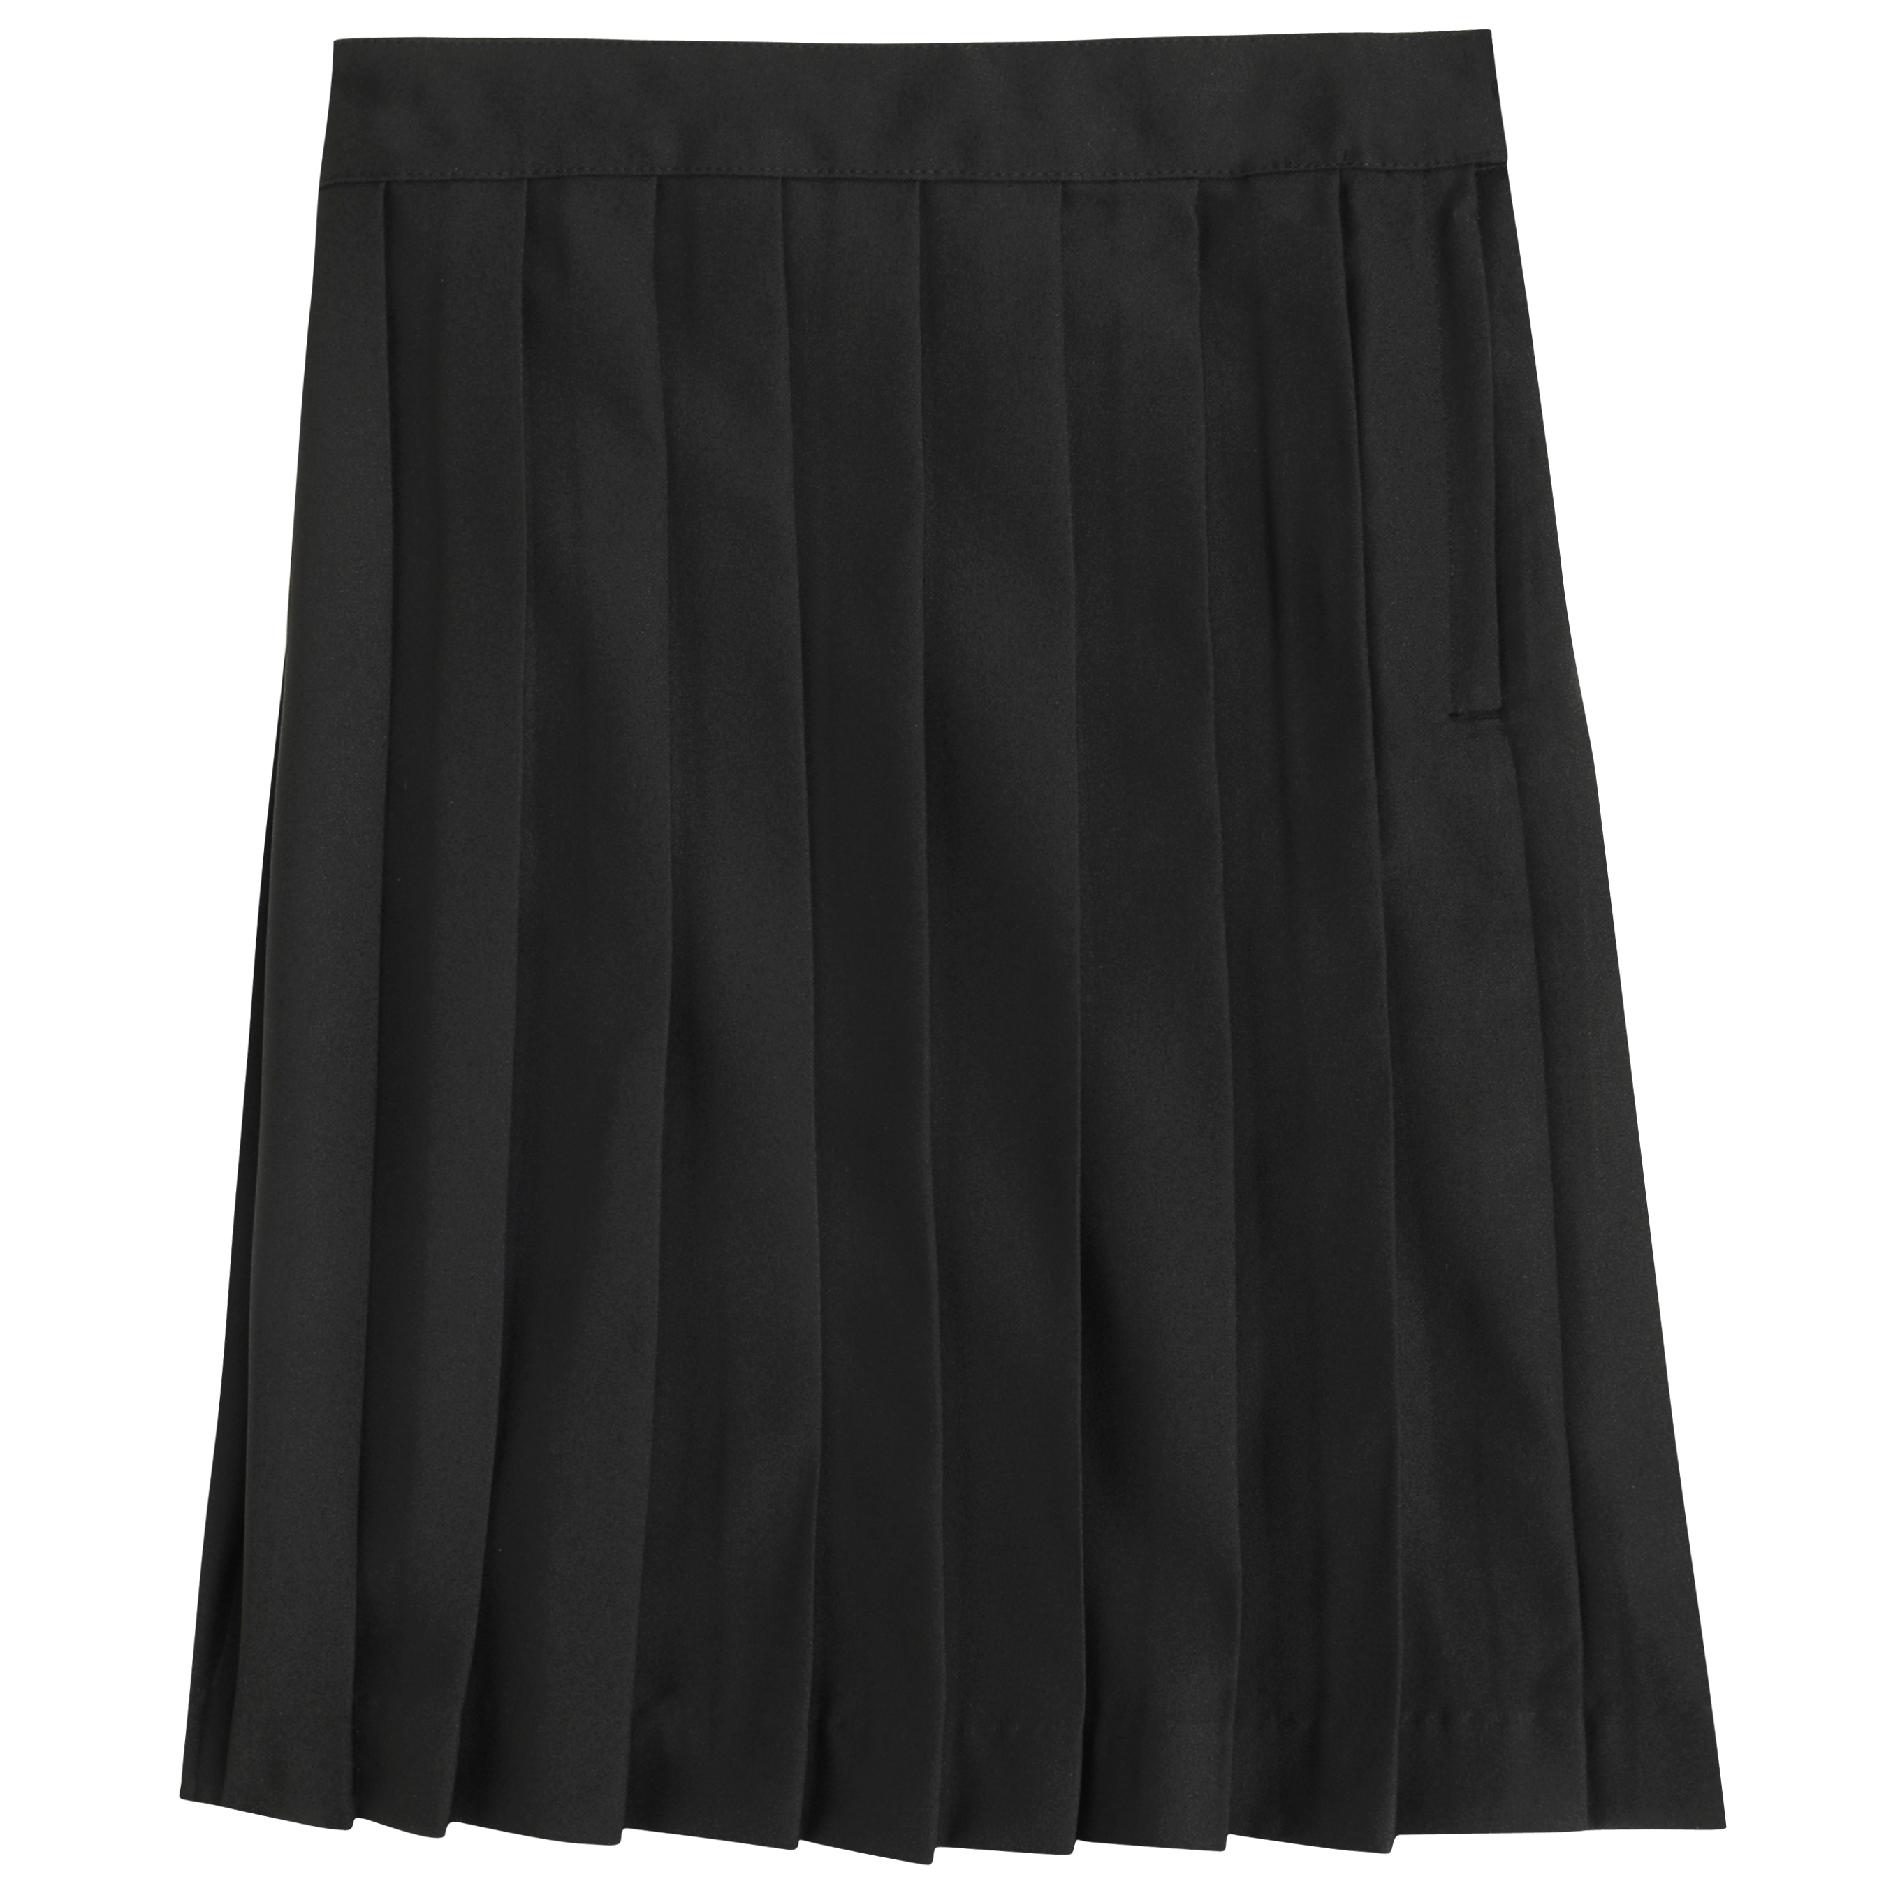 At School by French Toast Girls Plus Size Pleated Skirt